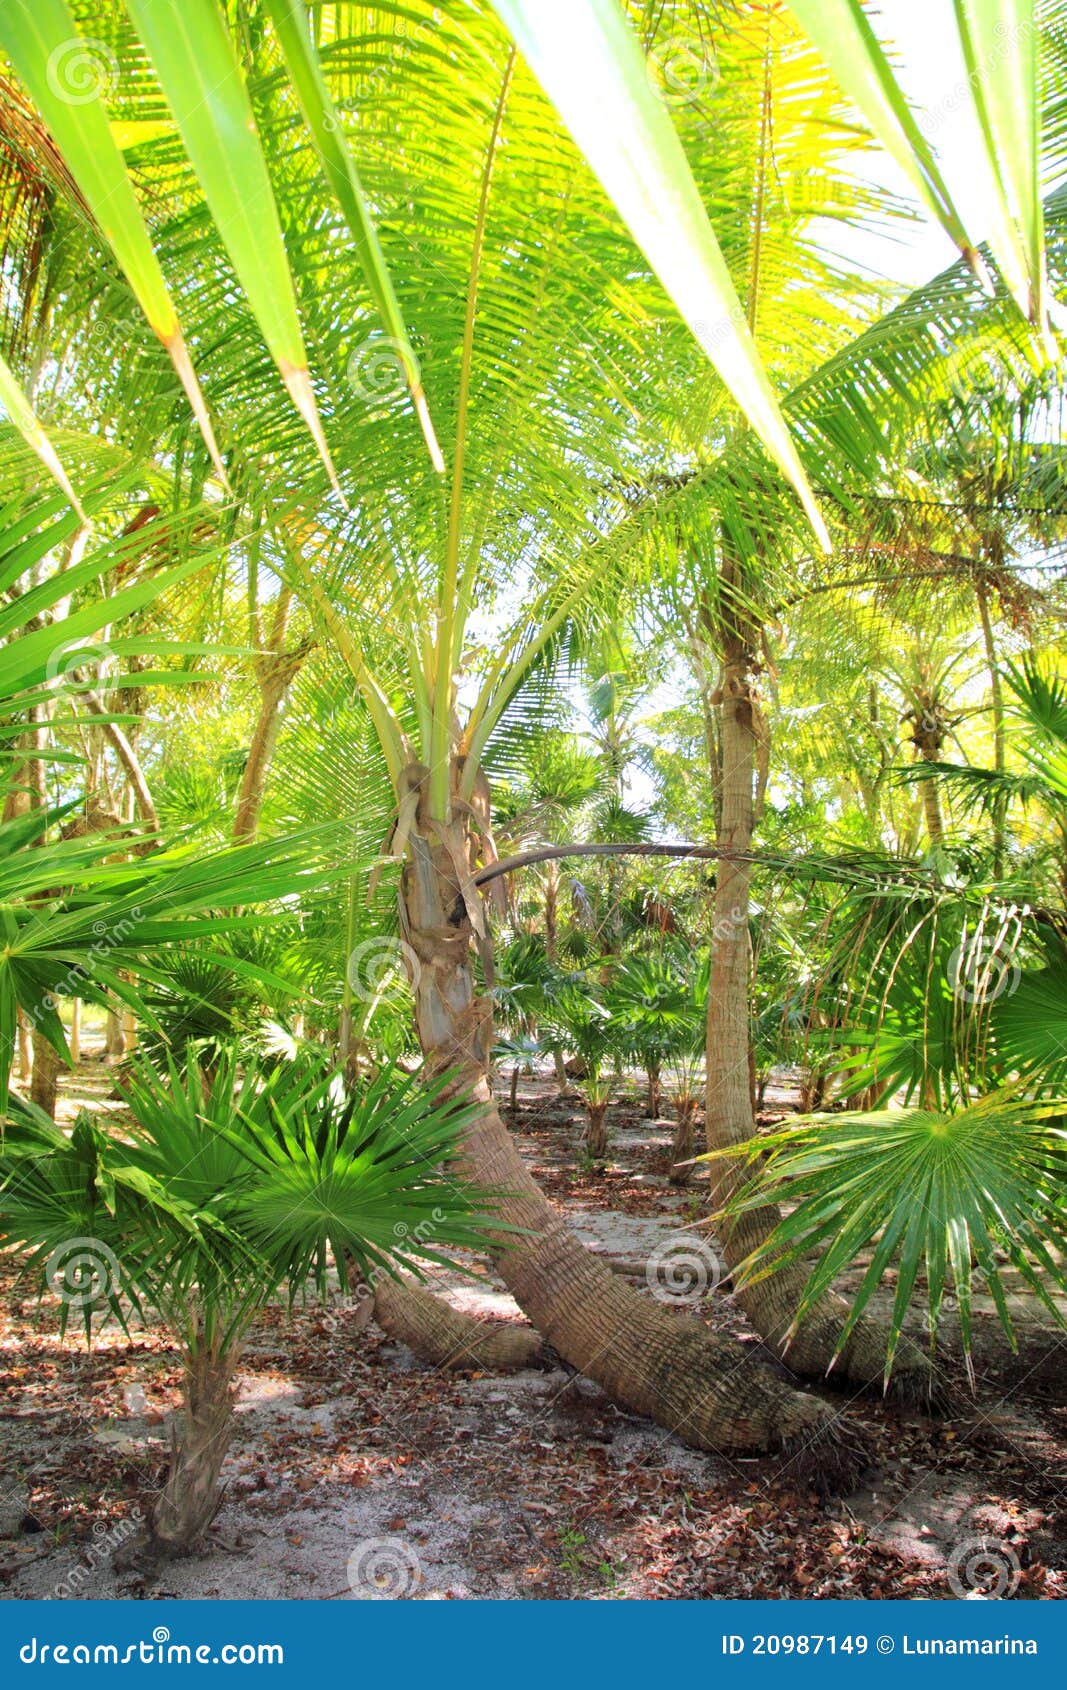 palm tree and chit jungle on caribbean beach area